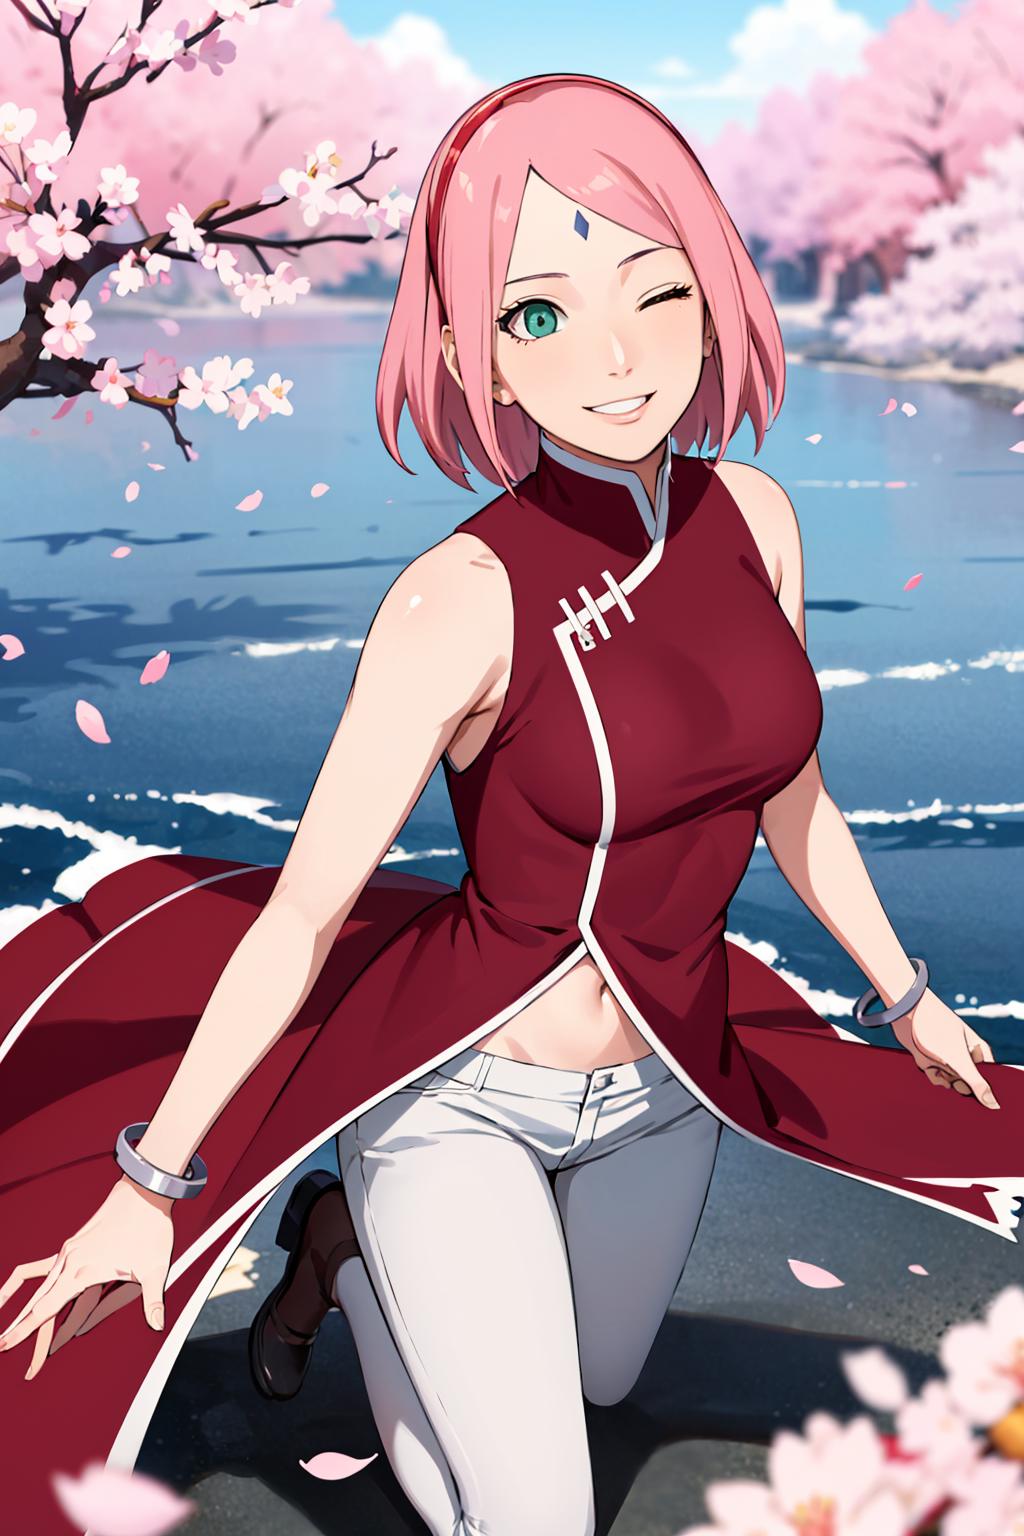 A Pink Hair Anime Girl with a Red Dress and Pink Eyes.